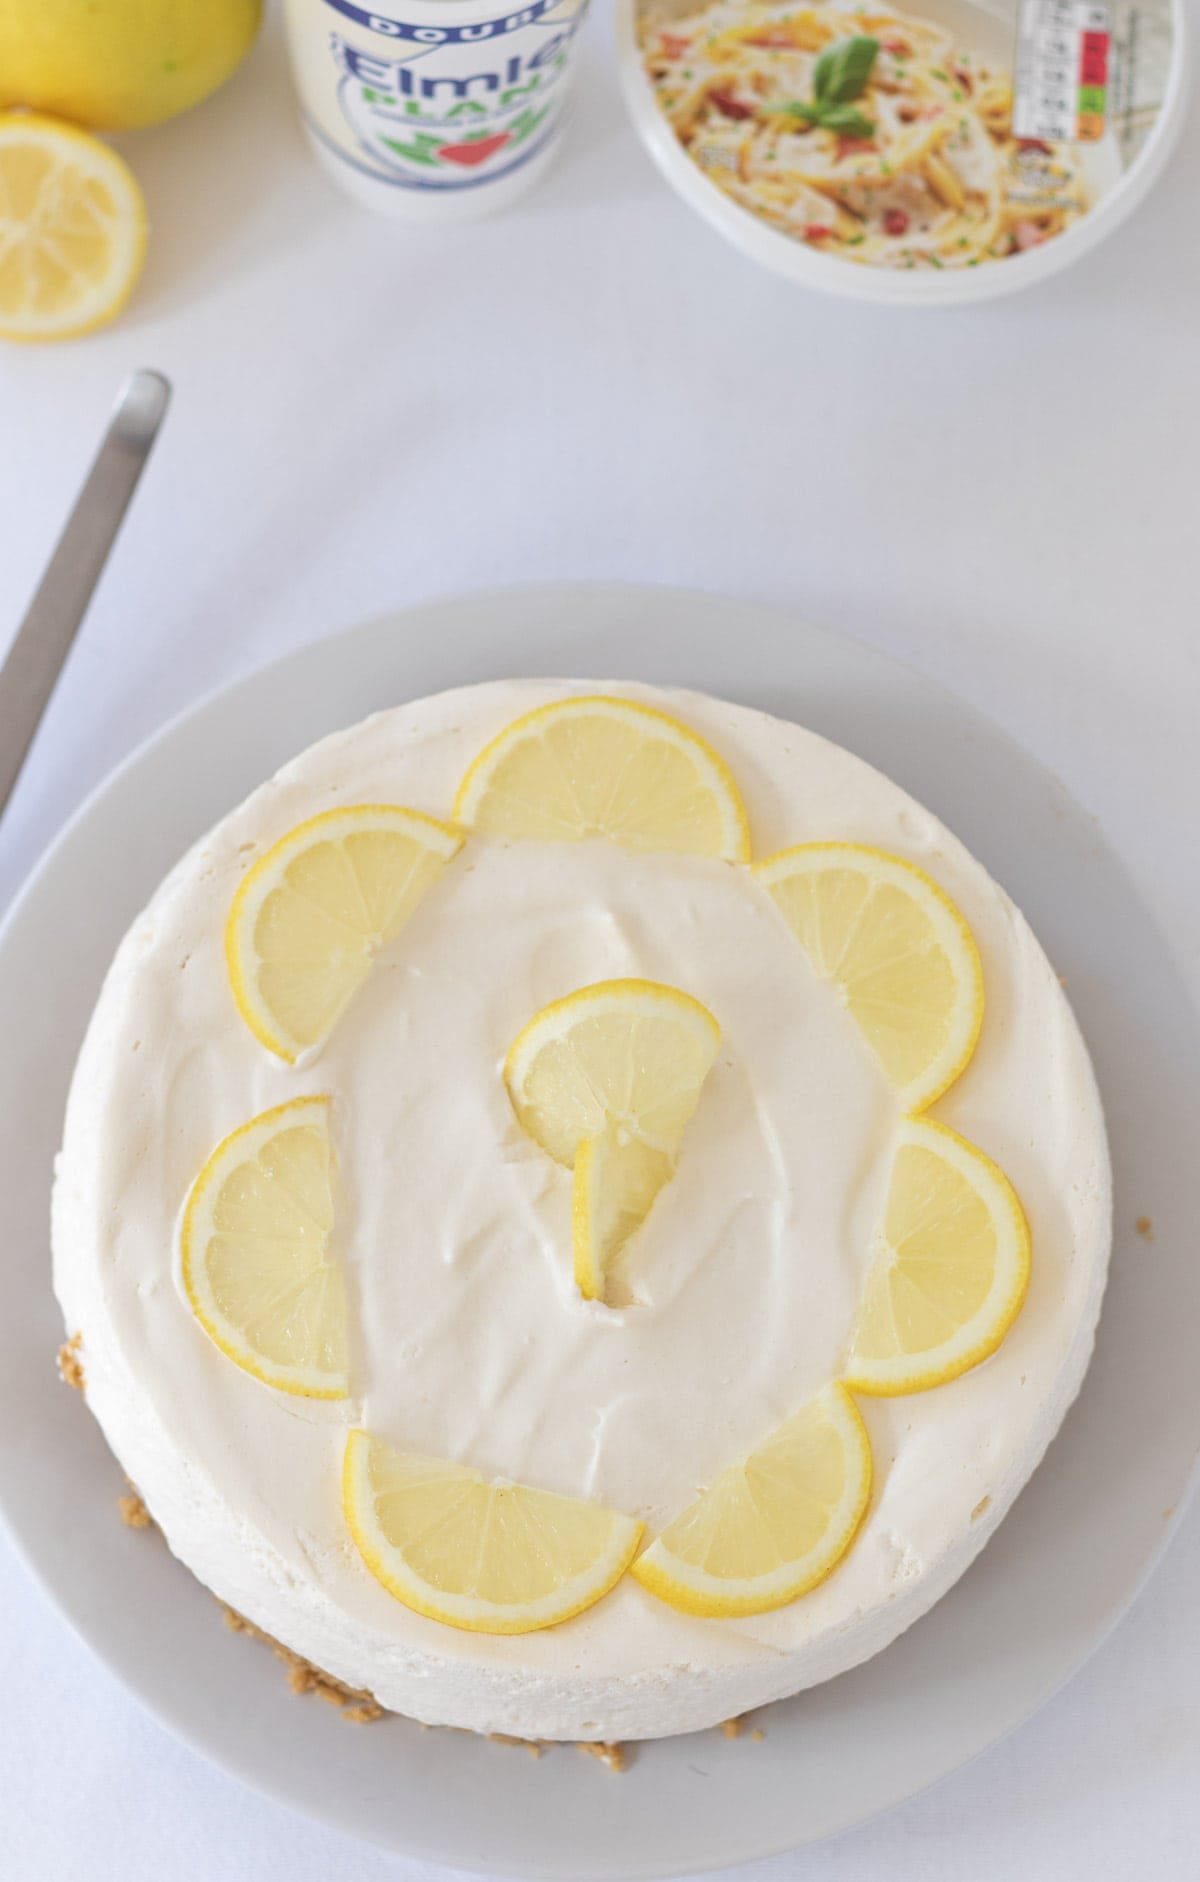 Birds eye view of a dairy free cheesecake decorated with slices of lemon with alternative dairy free product containers and a sliced lemon in the background.